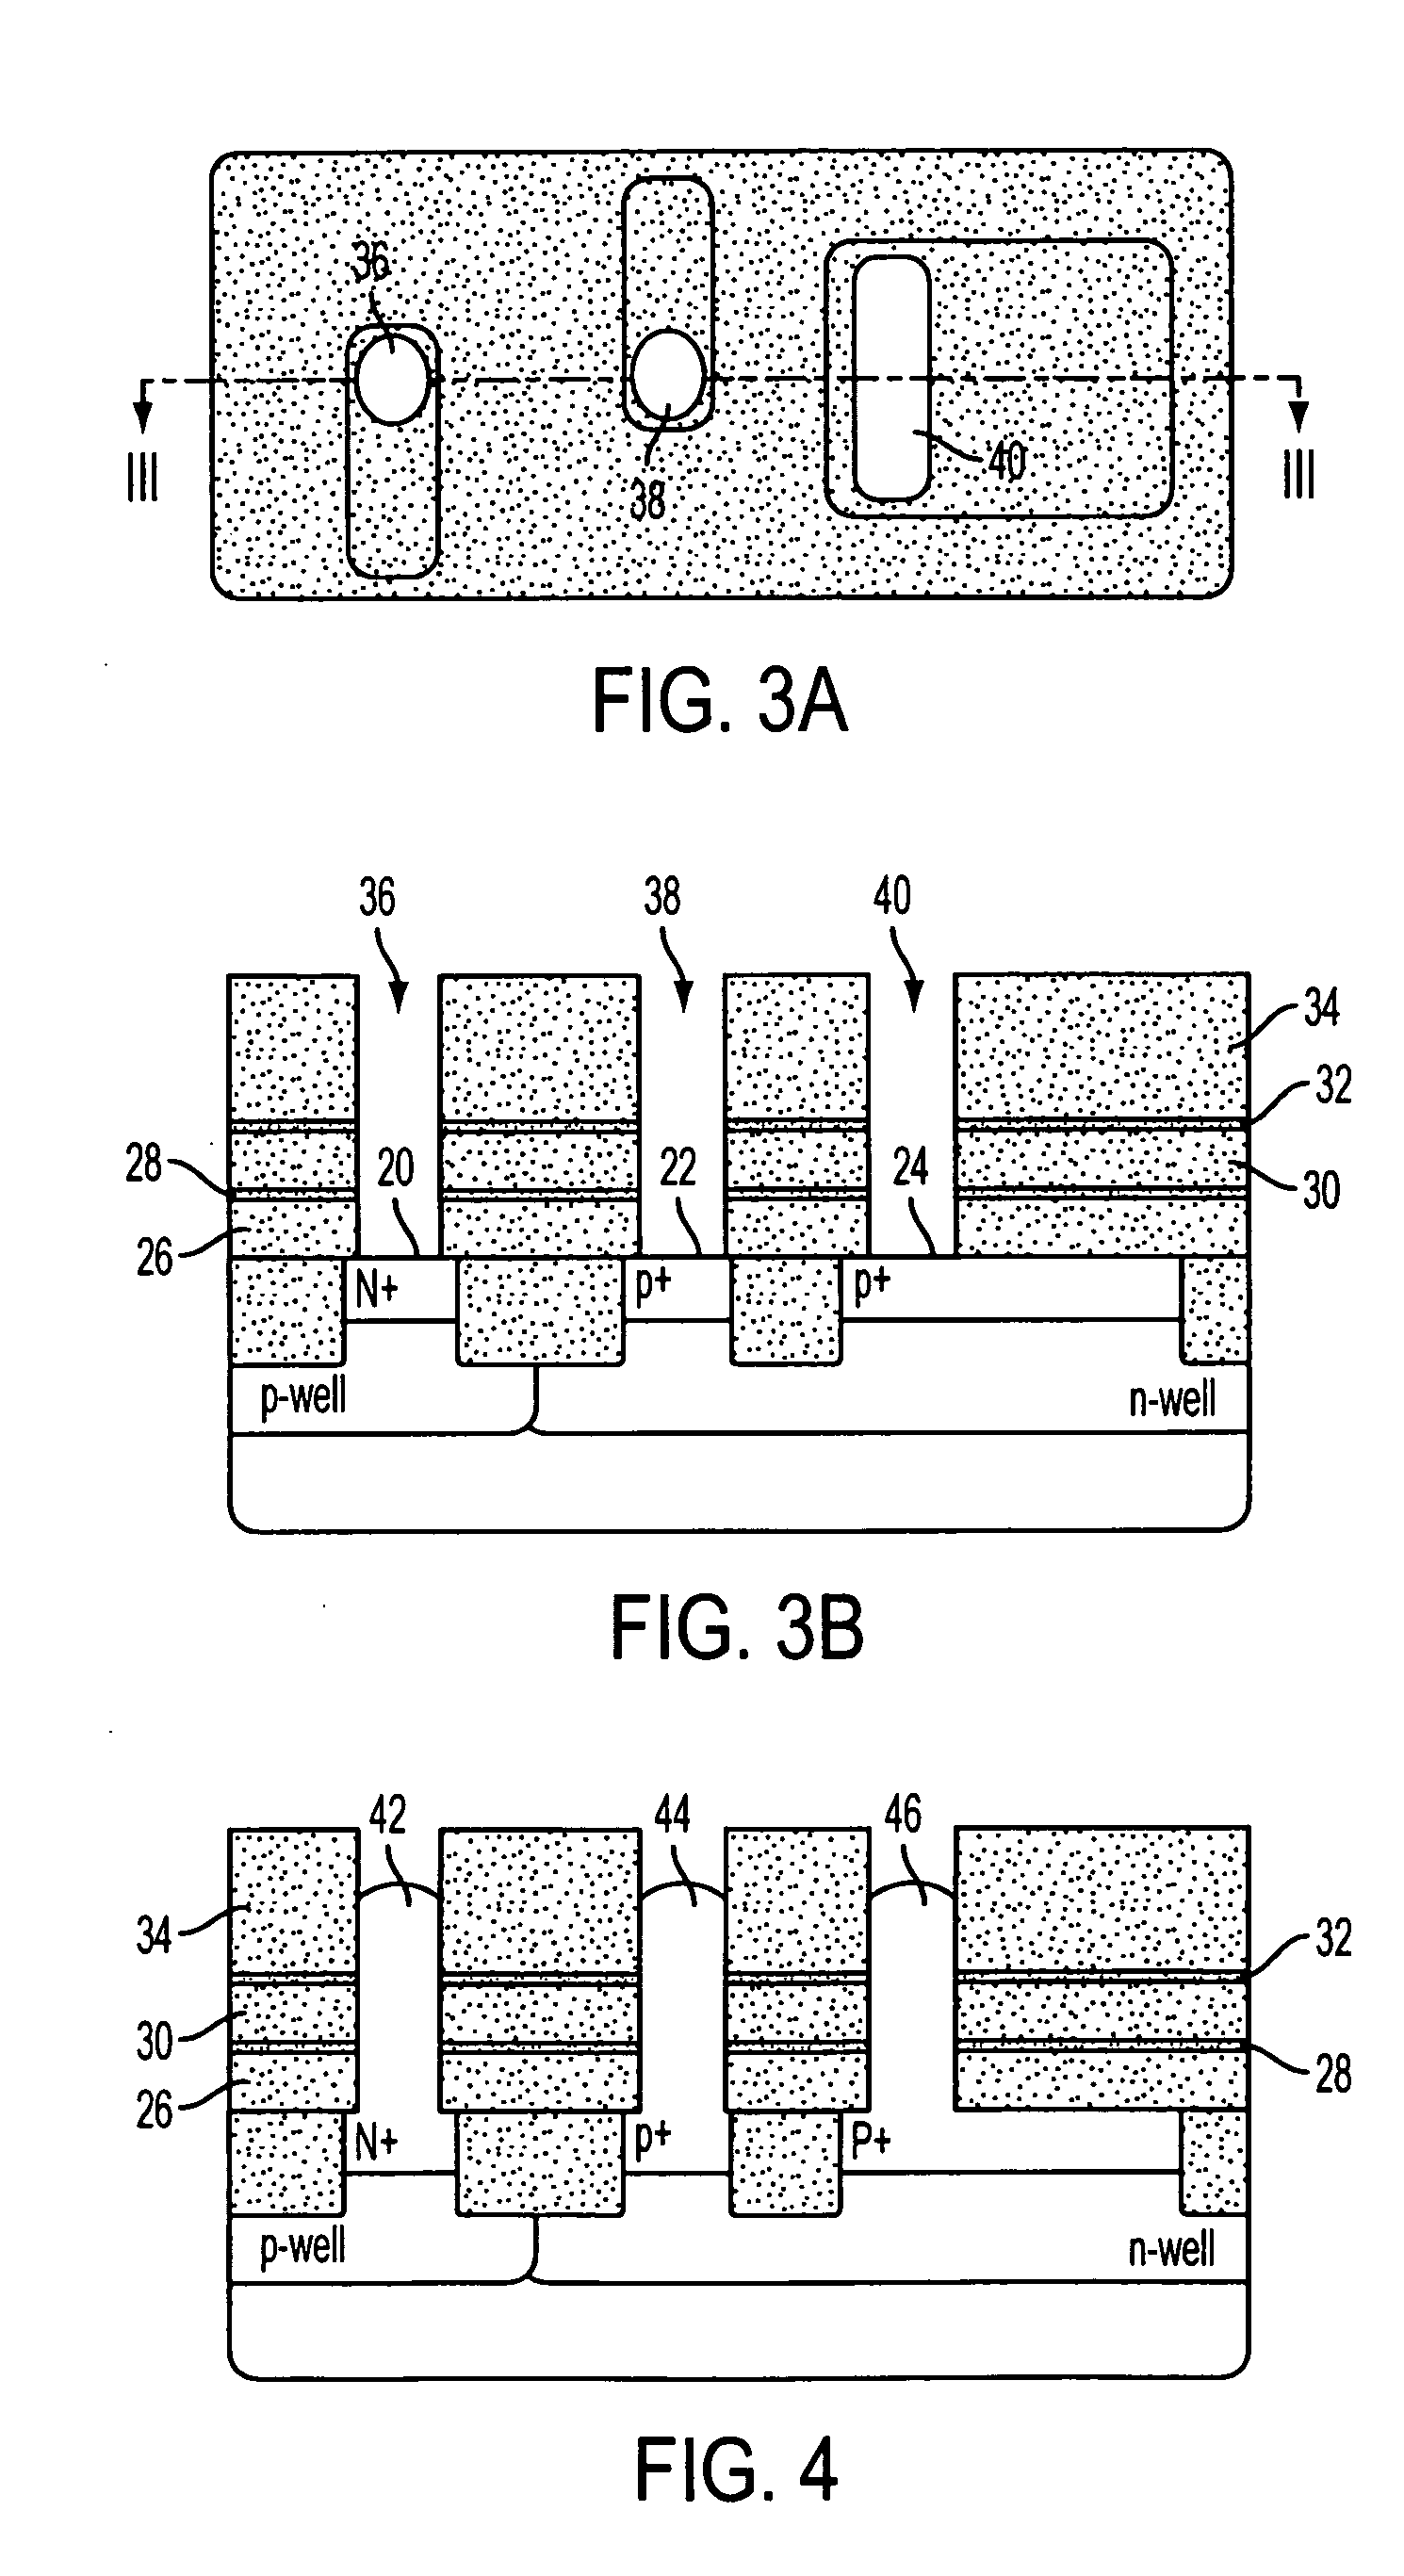 Vertical wrap-around-gate field-effect-transistor for high density, low voltage logic and memory array